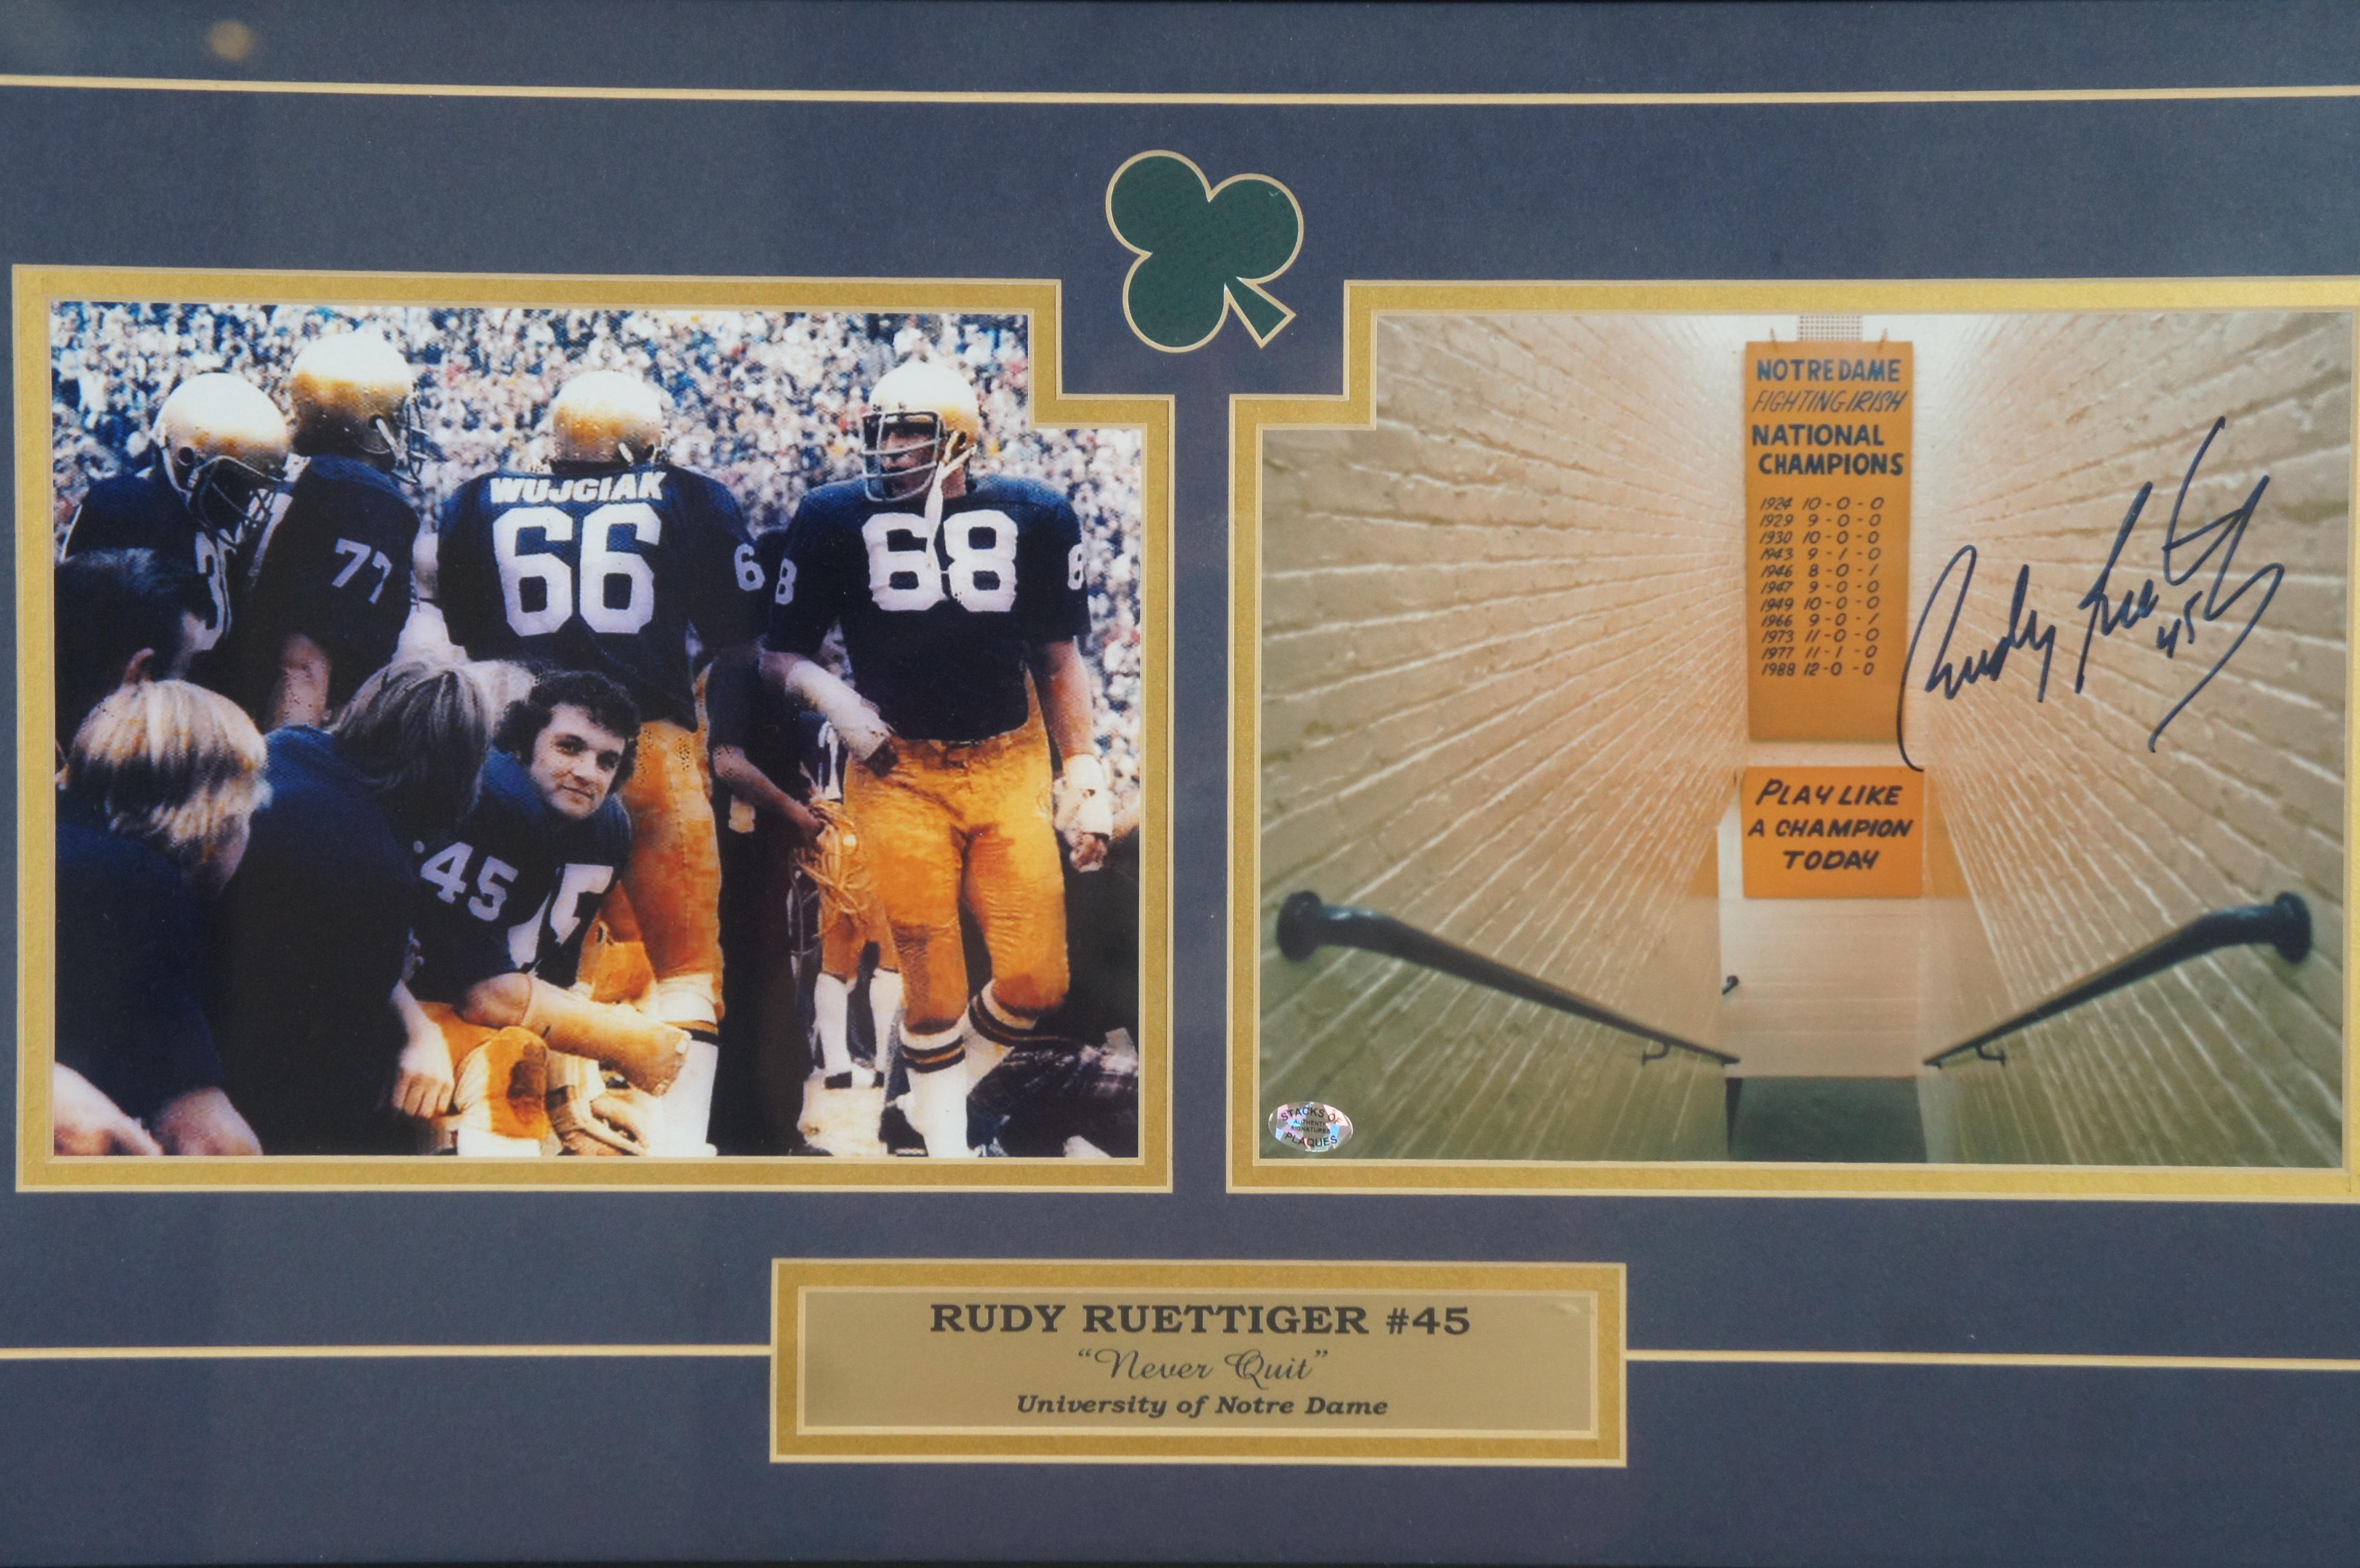 Paper Vintage Rudy Ruettiger #45 Notre Dame Football Autographed Photo 27